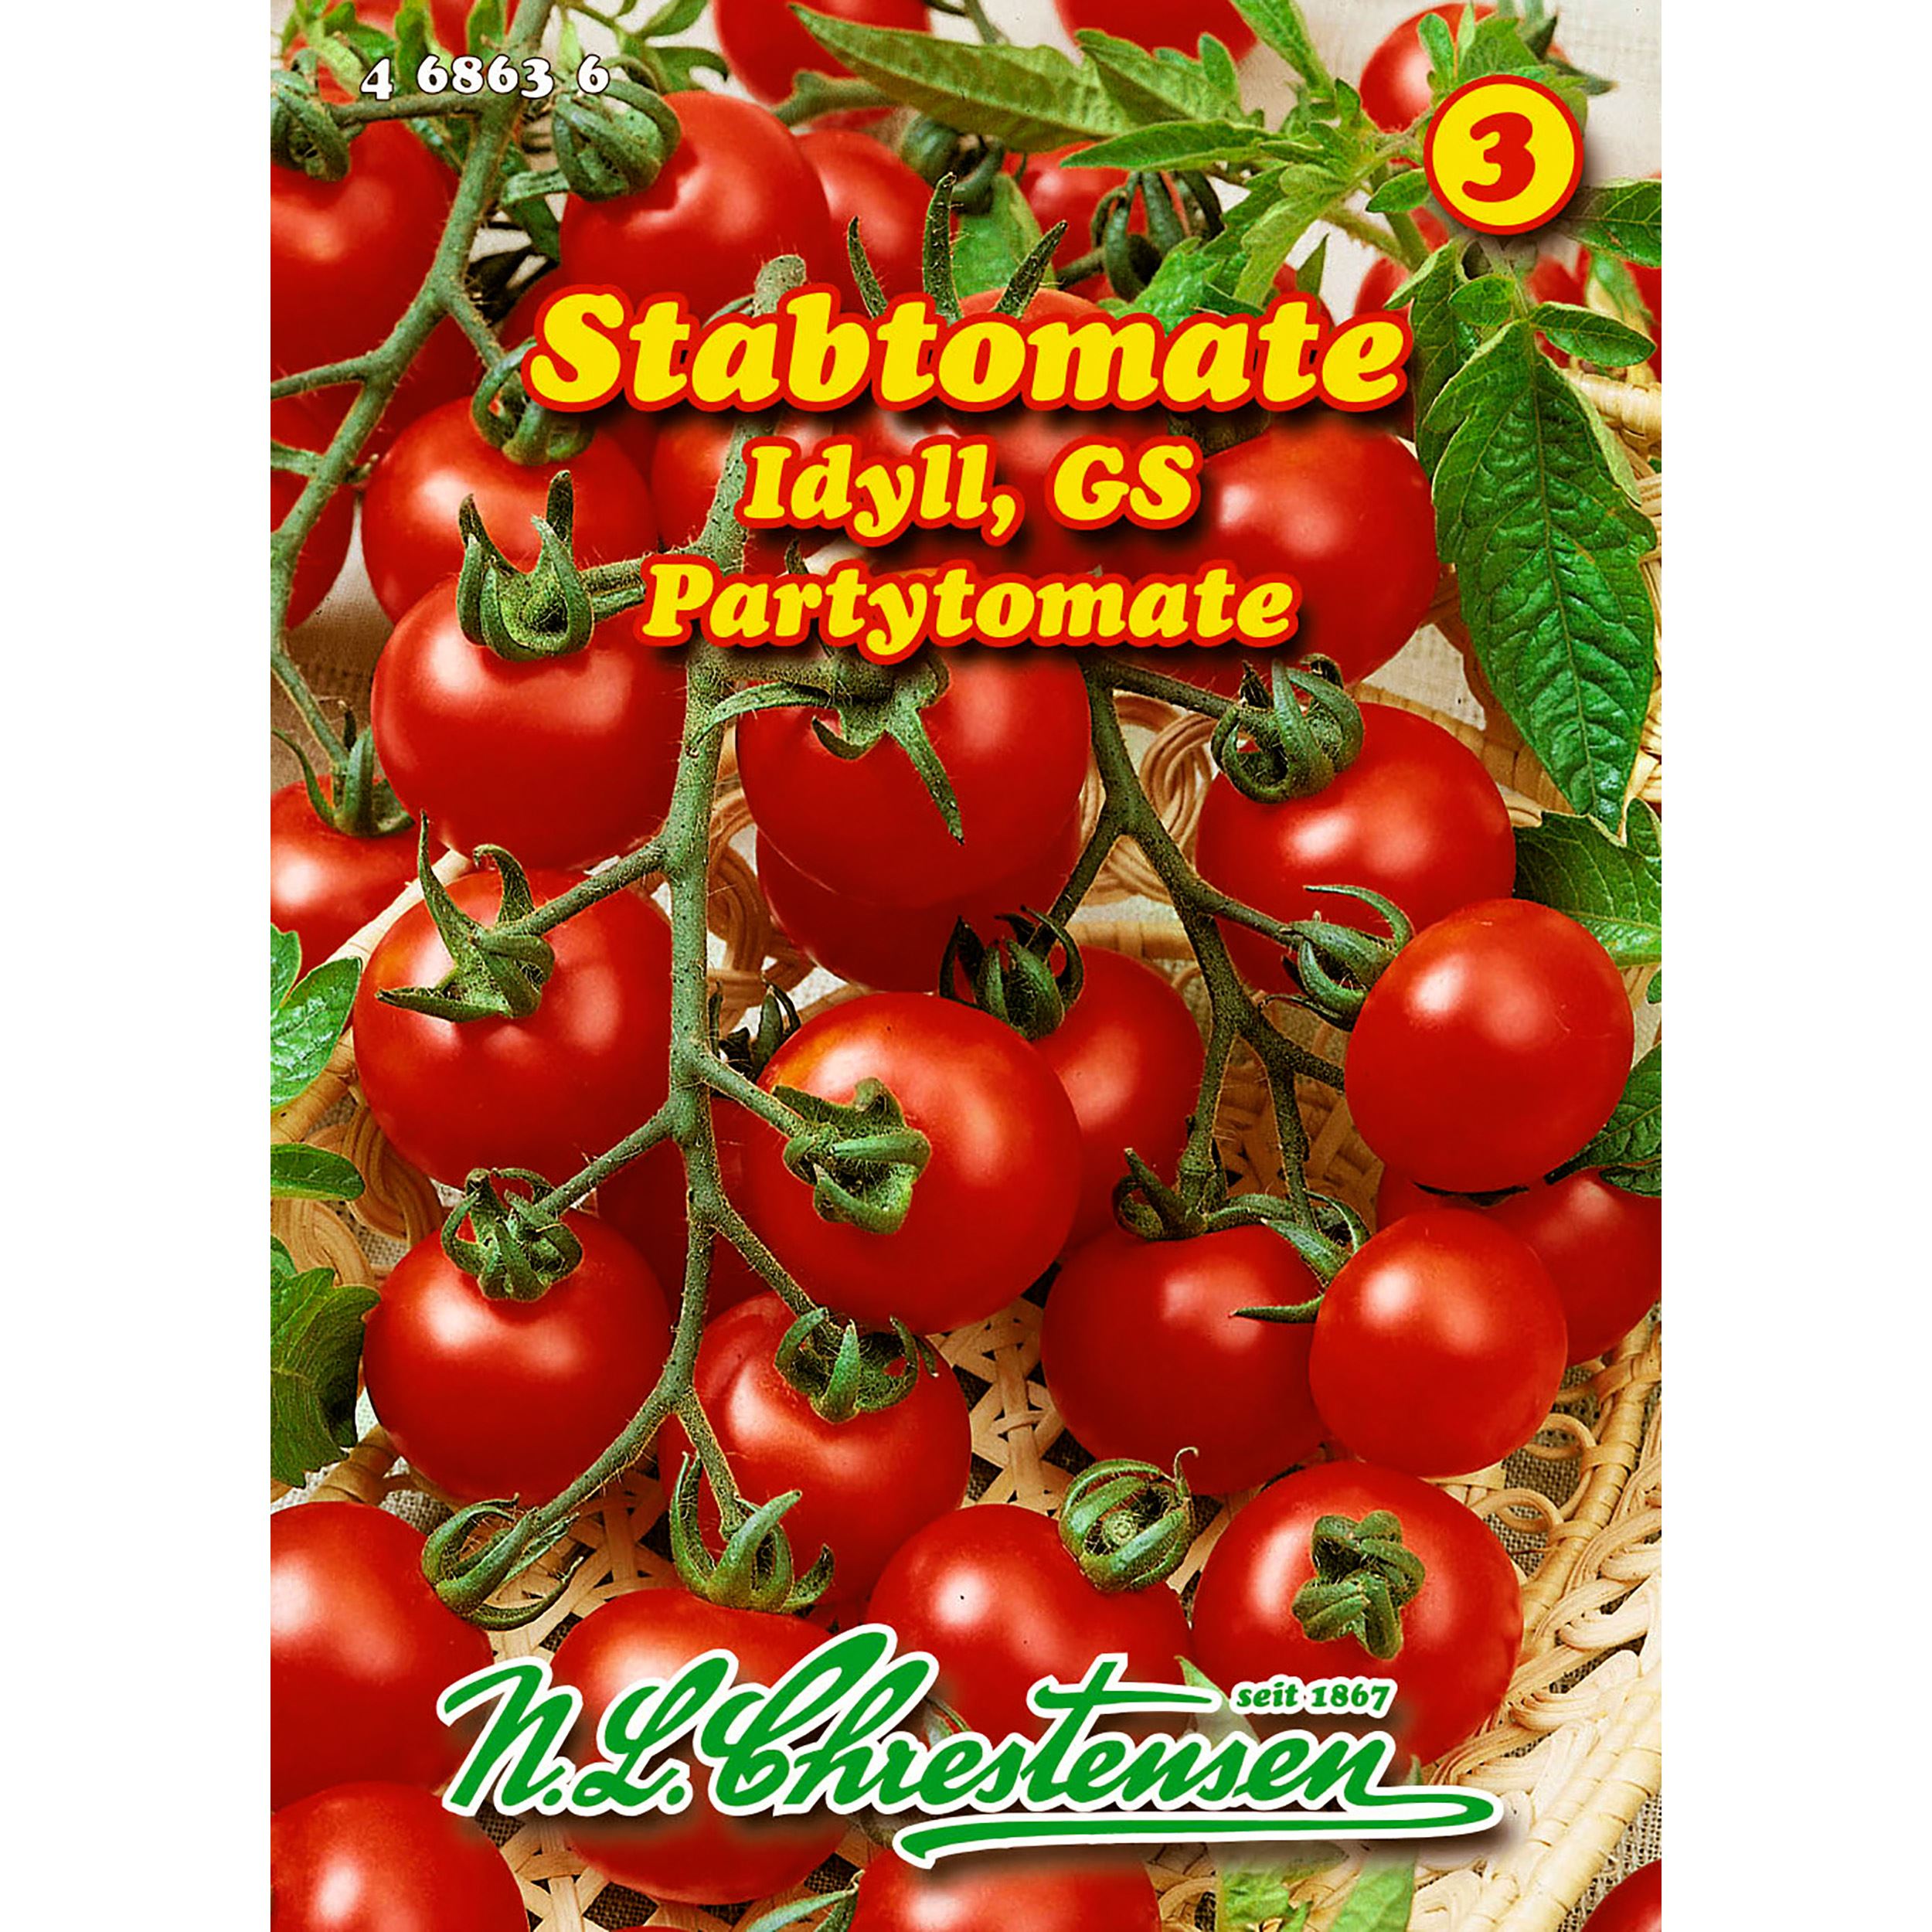 Partytomate, Idyll, GS